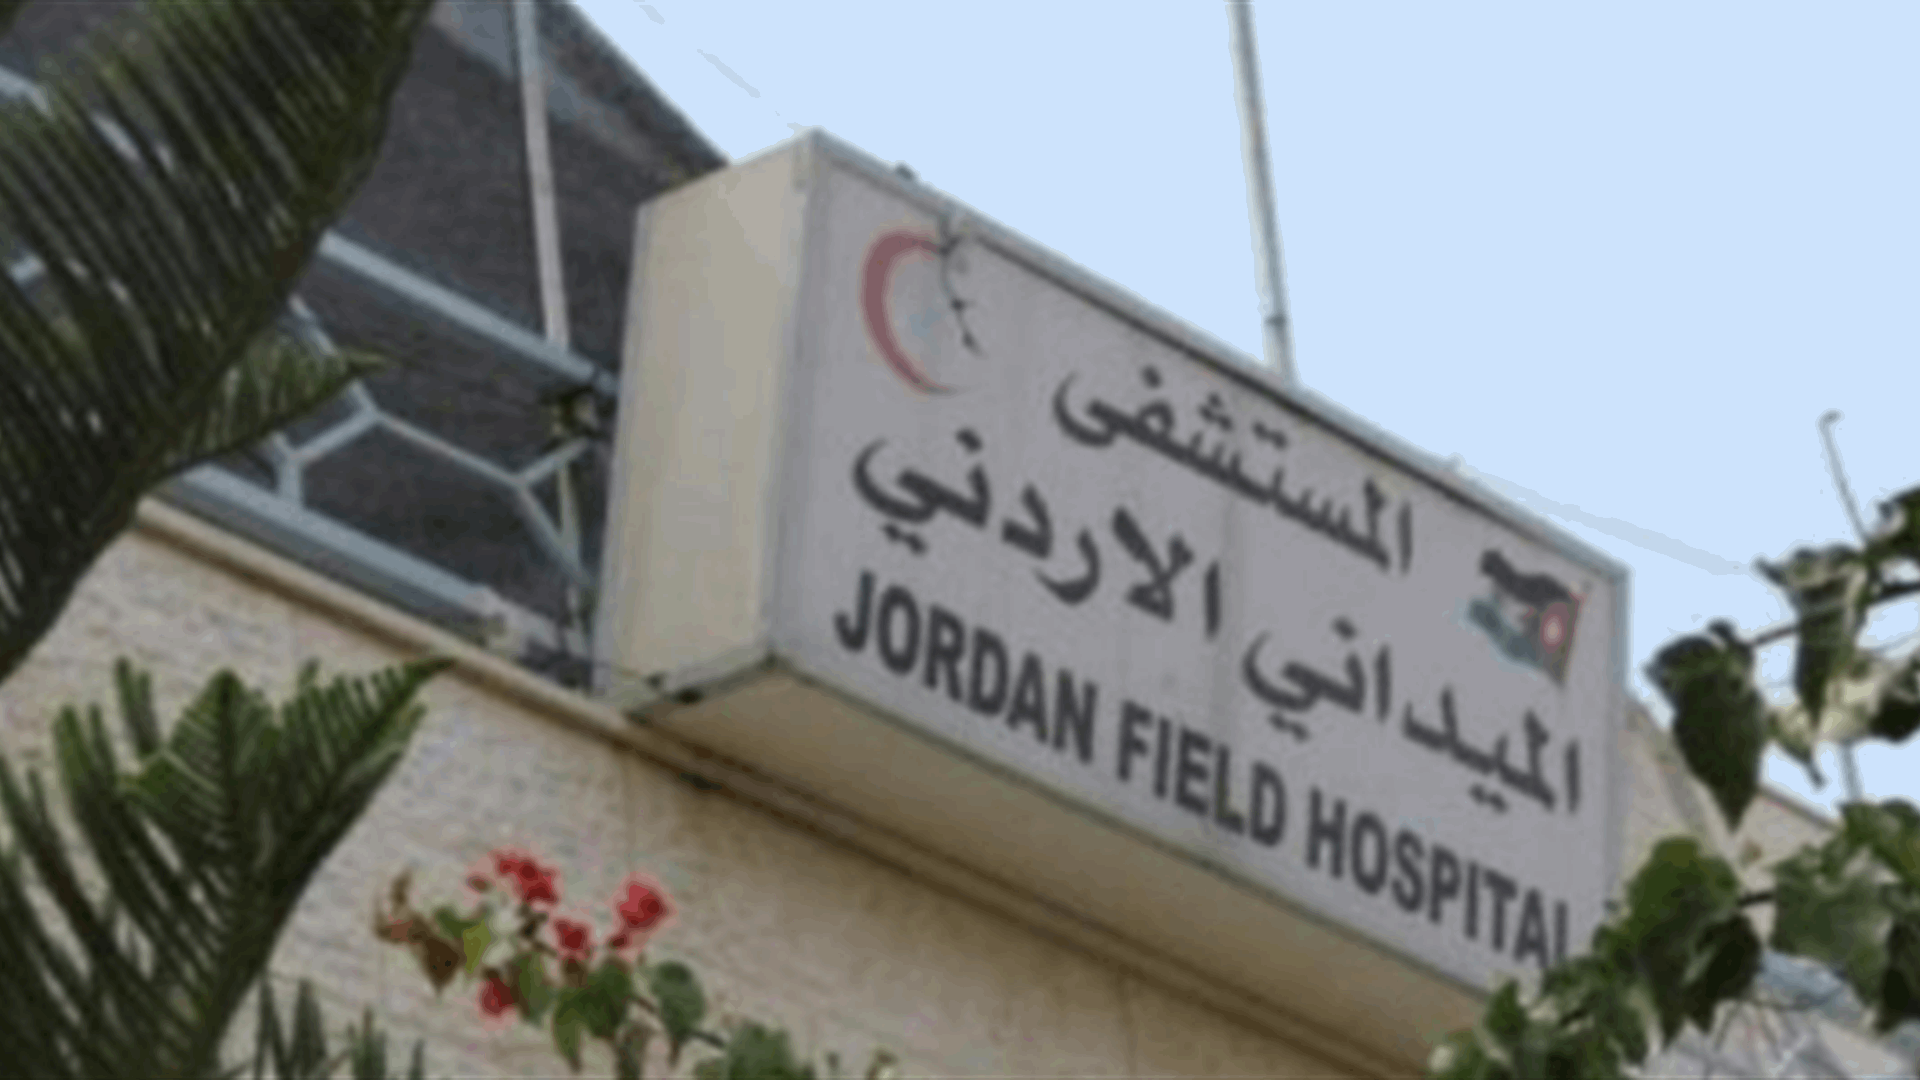 Injuries among seven staff members of Jordanian field hospital: Official